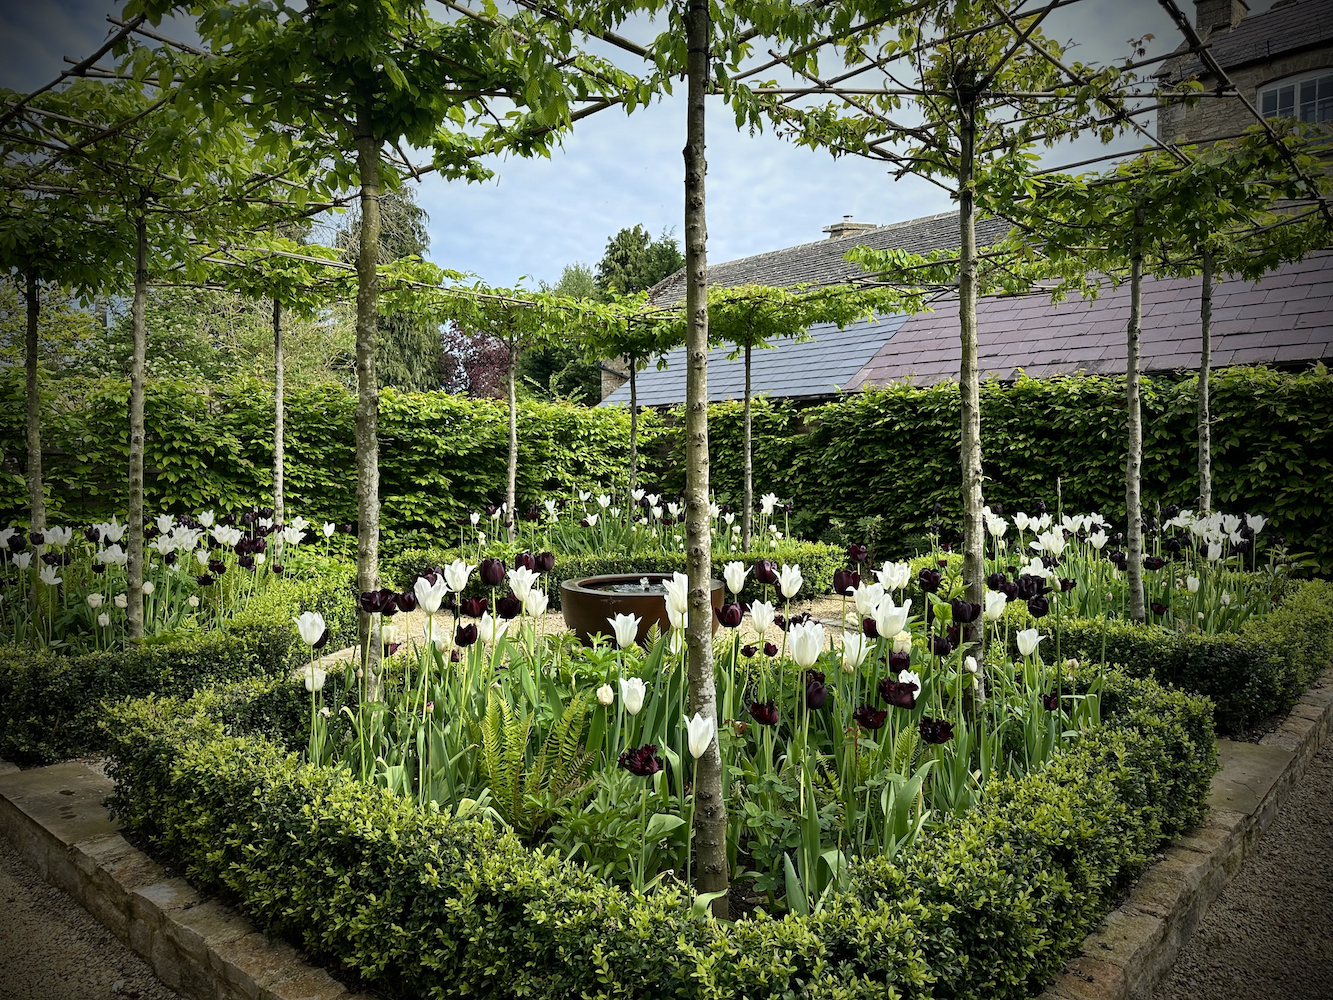 Monastic parterre garden at Barn Cottage with pleached trees, Buxus hedging and white and black tulips